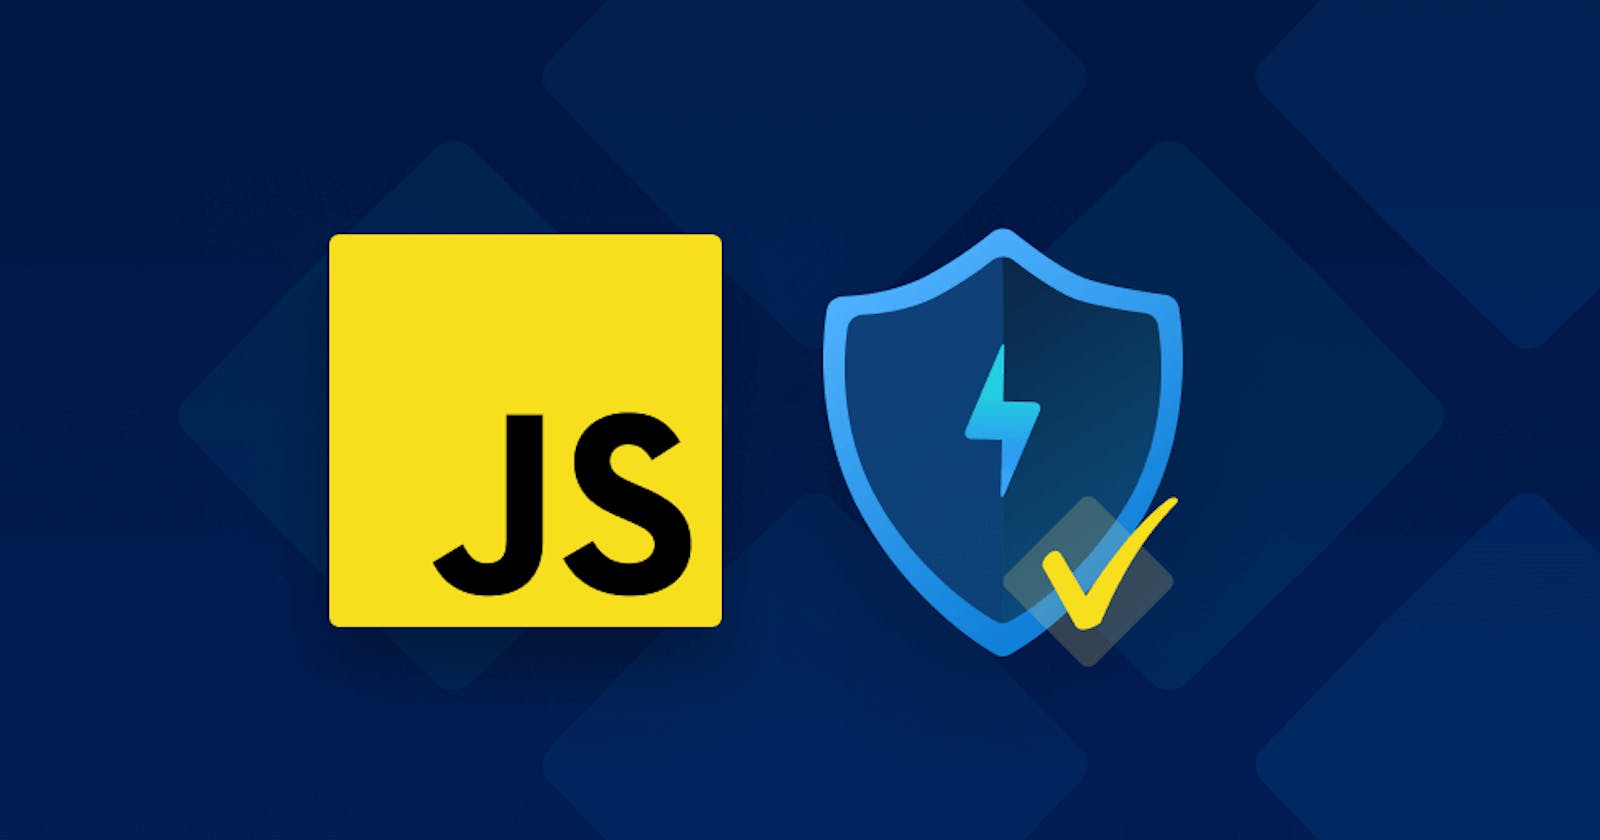 Best Practices for Writing Secure JavaScript Code